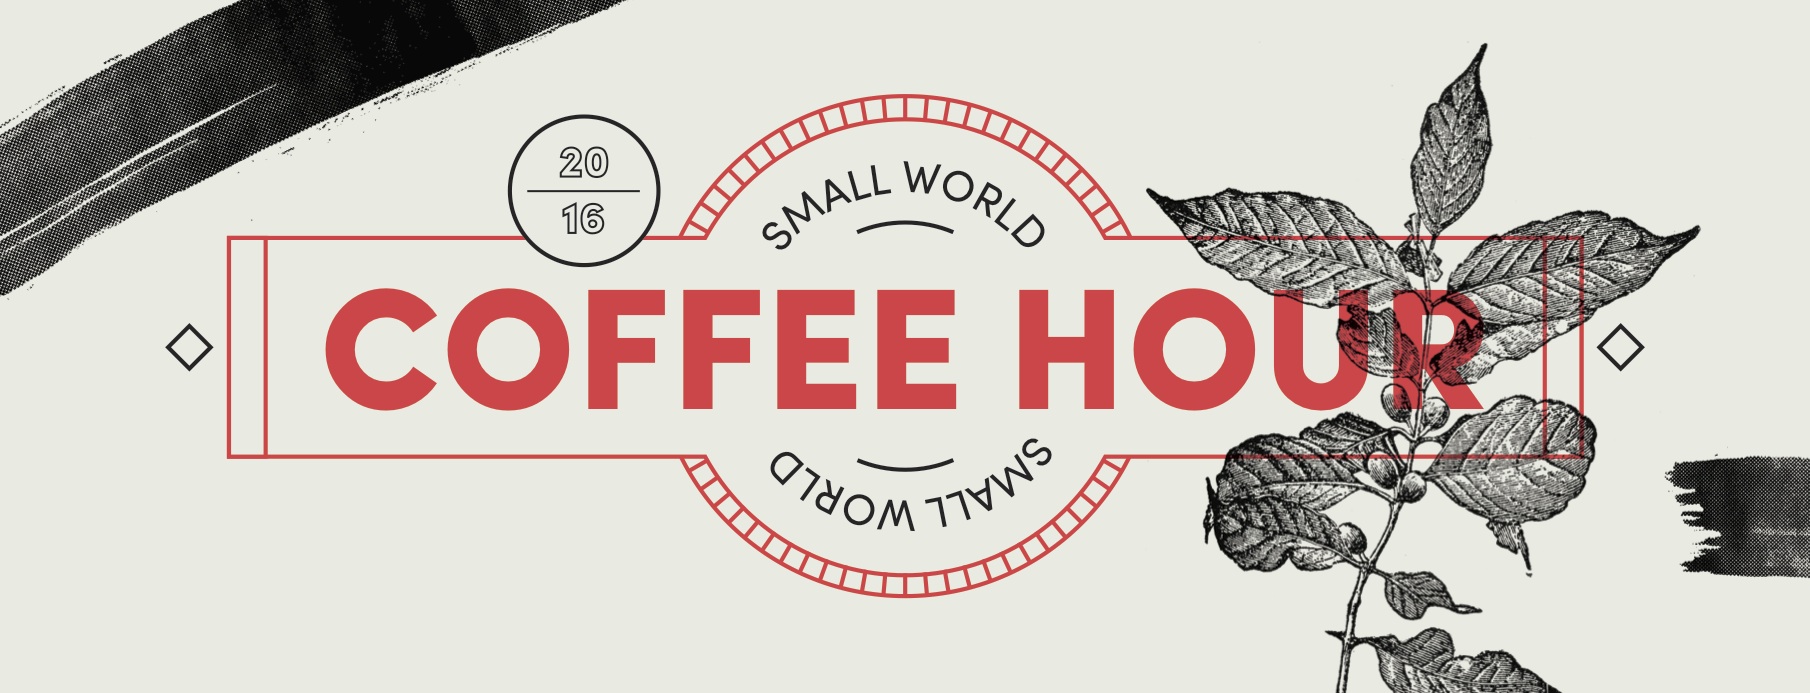 Coffee hour cover